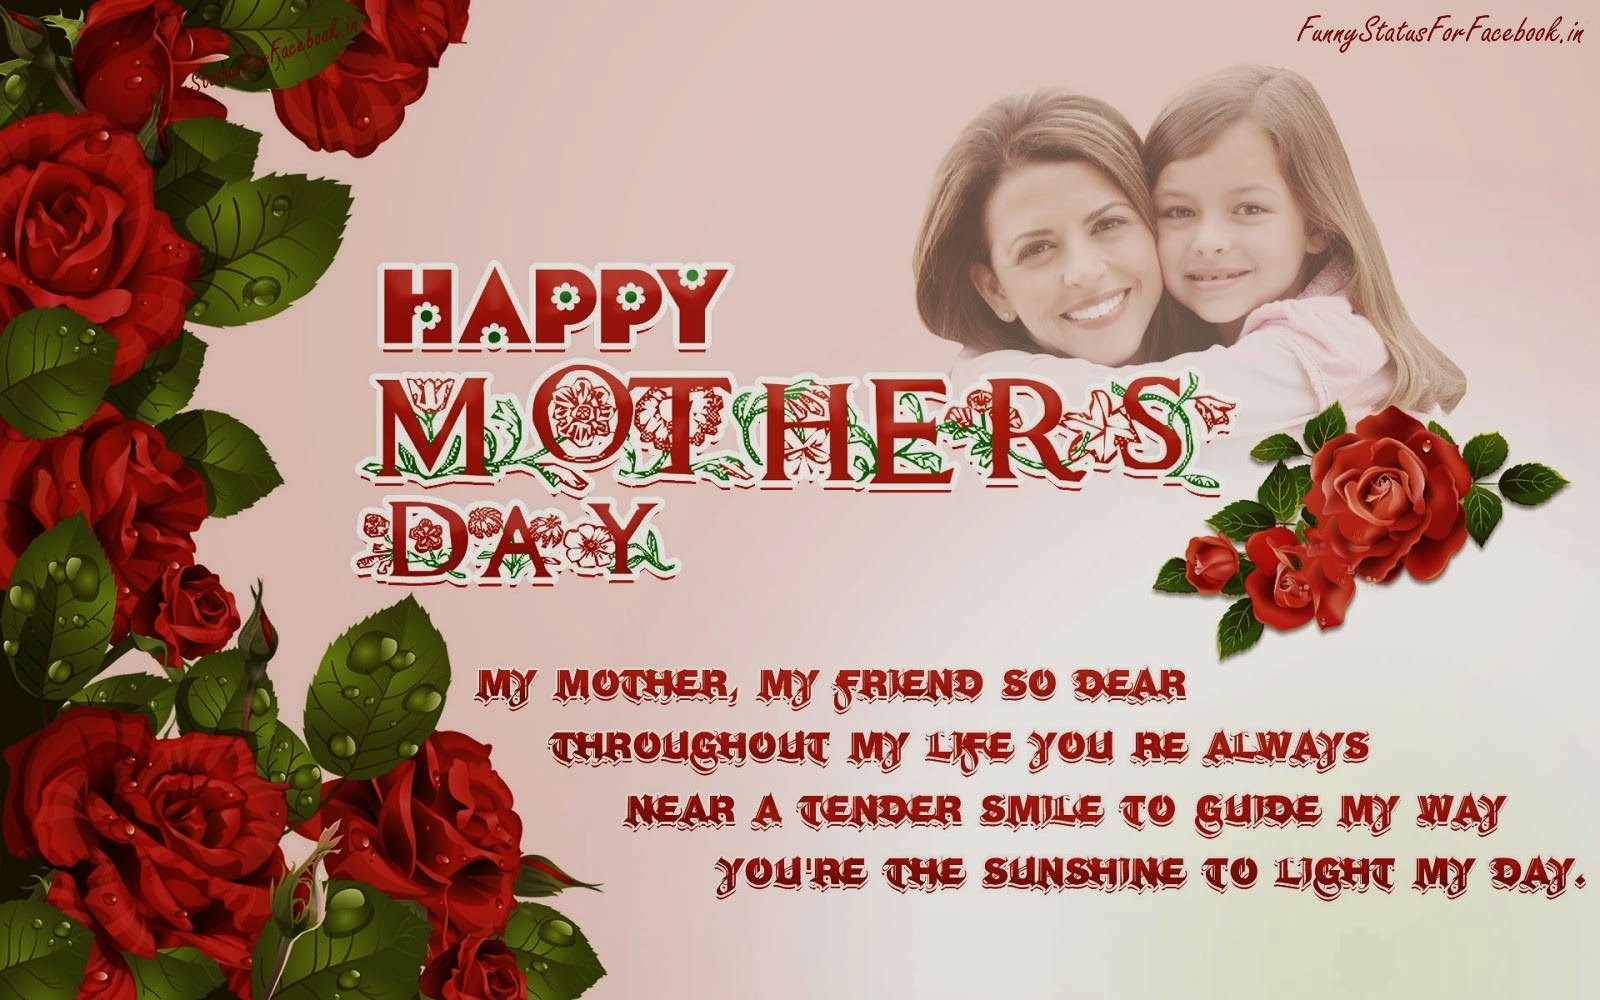 My Mother my friend so dear Throughout my life you re always near A